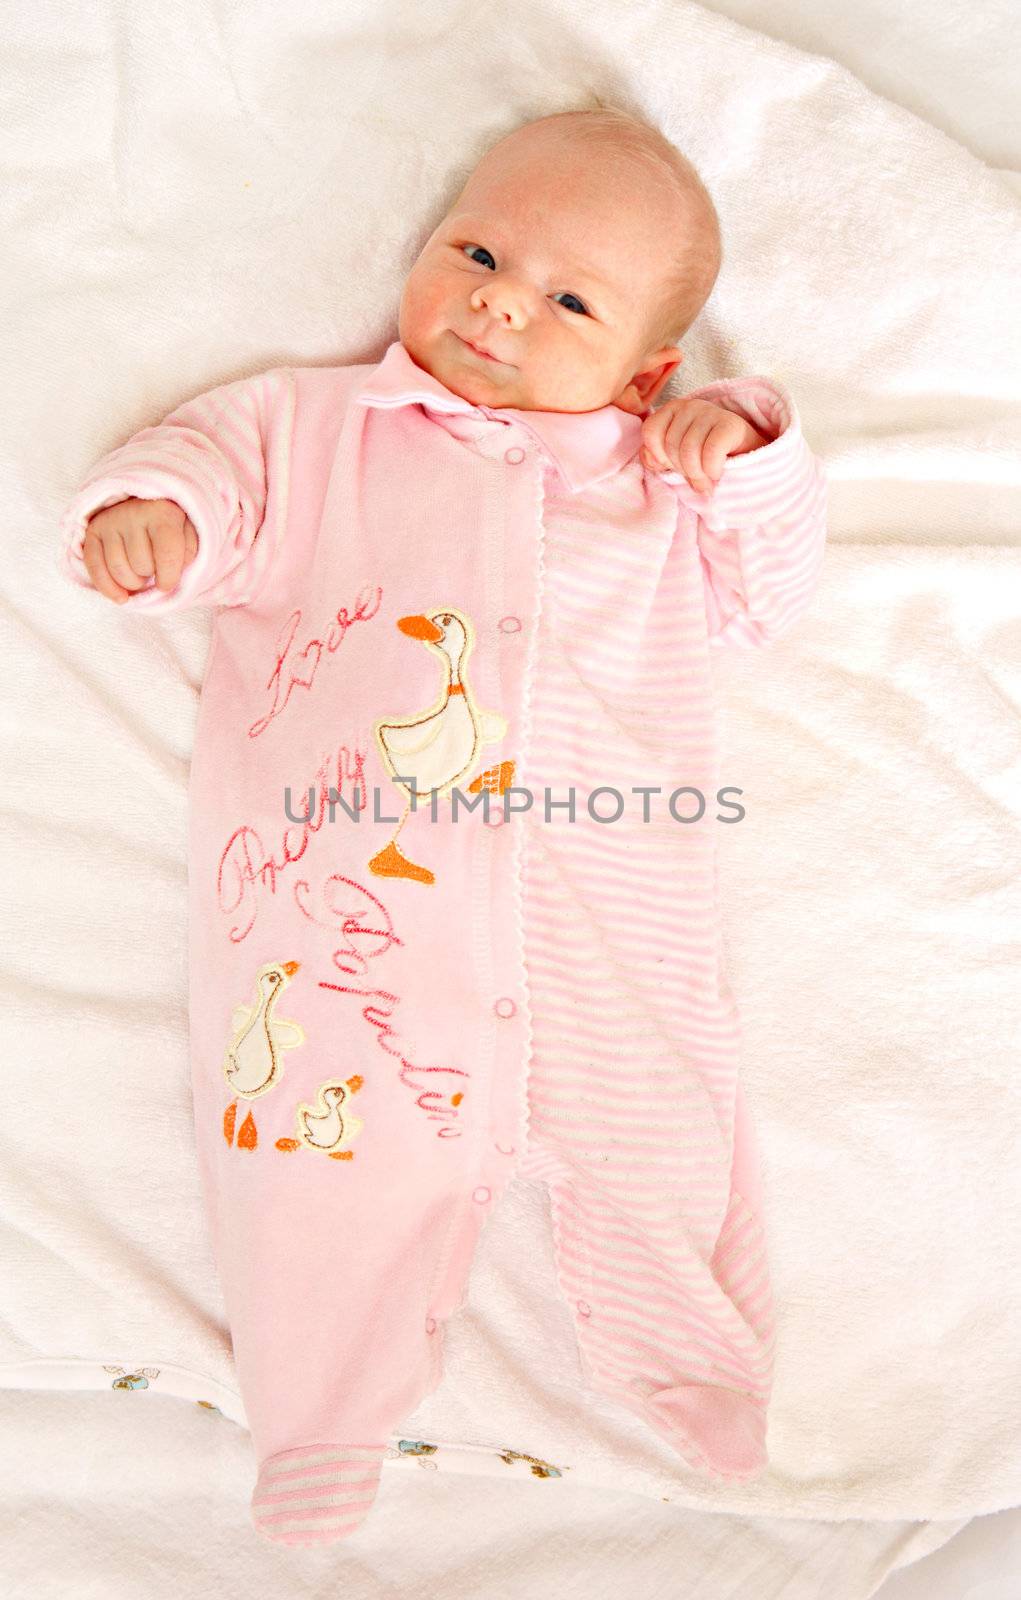 The newborn girl in pink clothes on a white background
